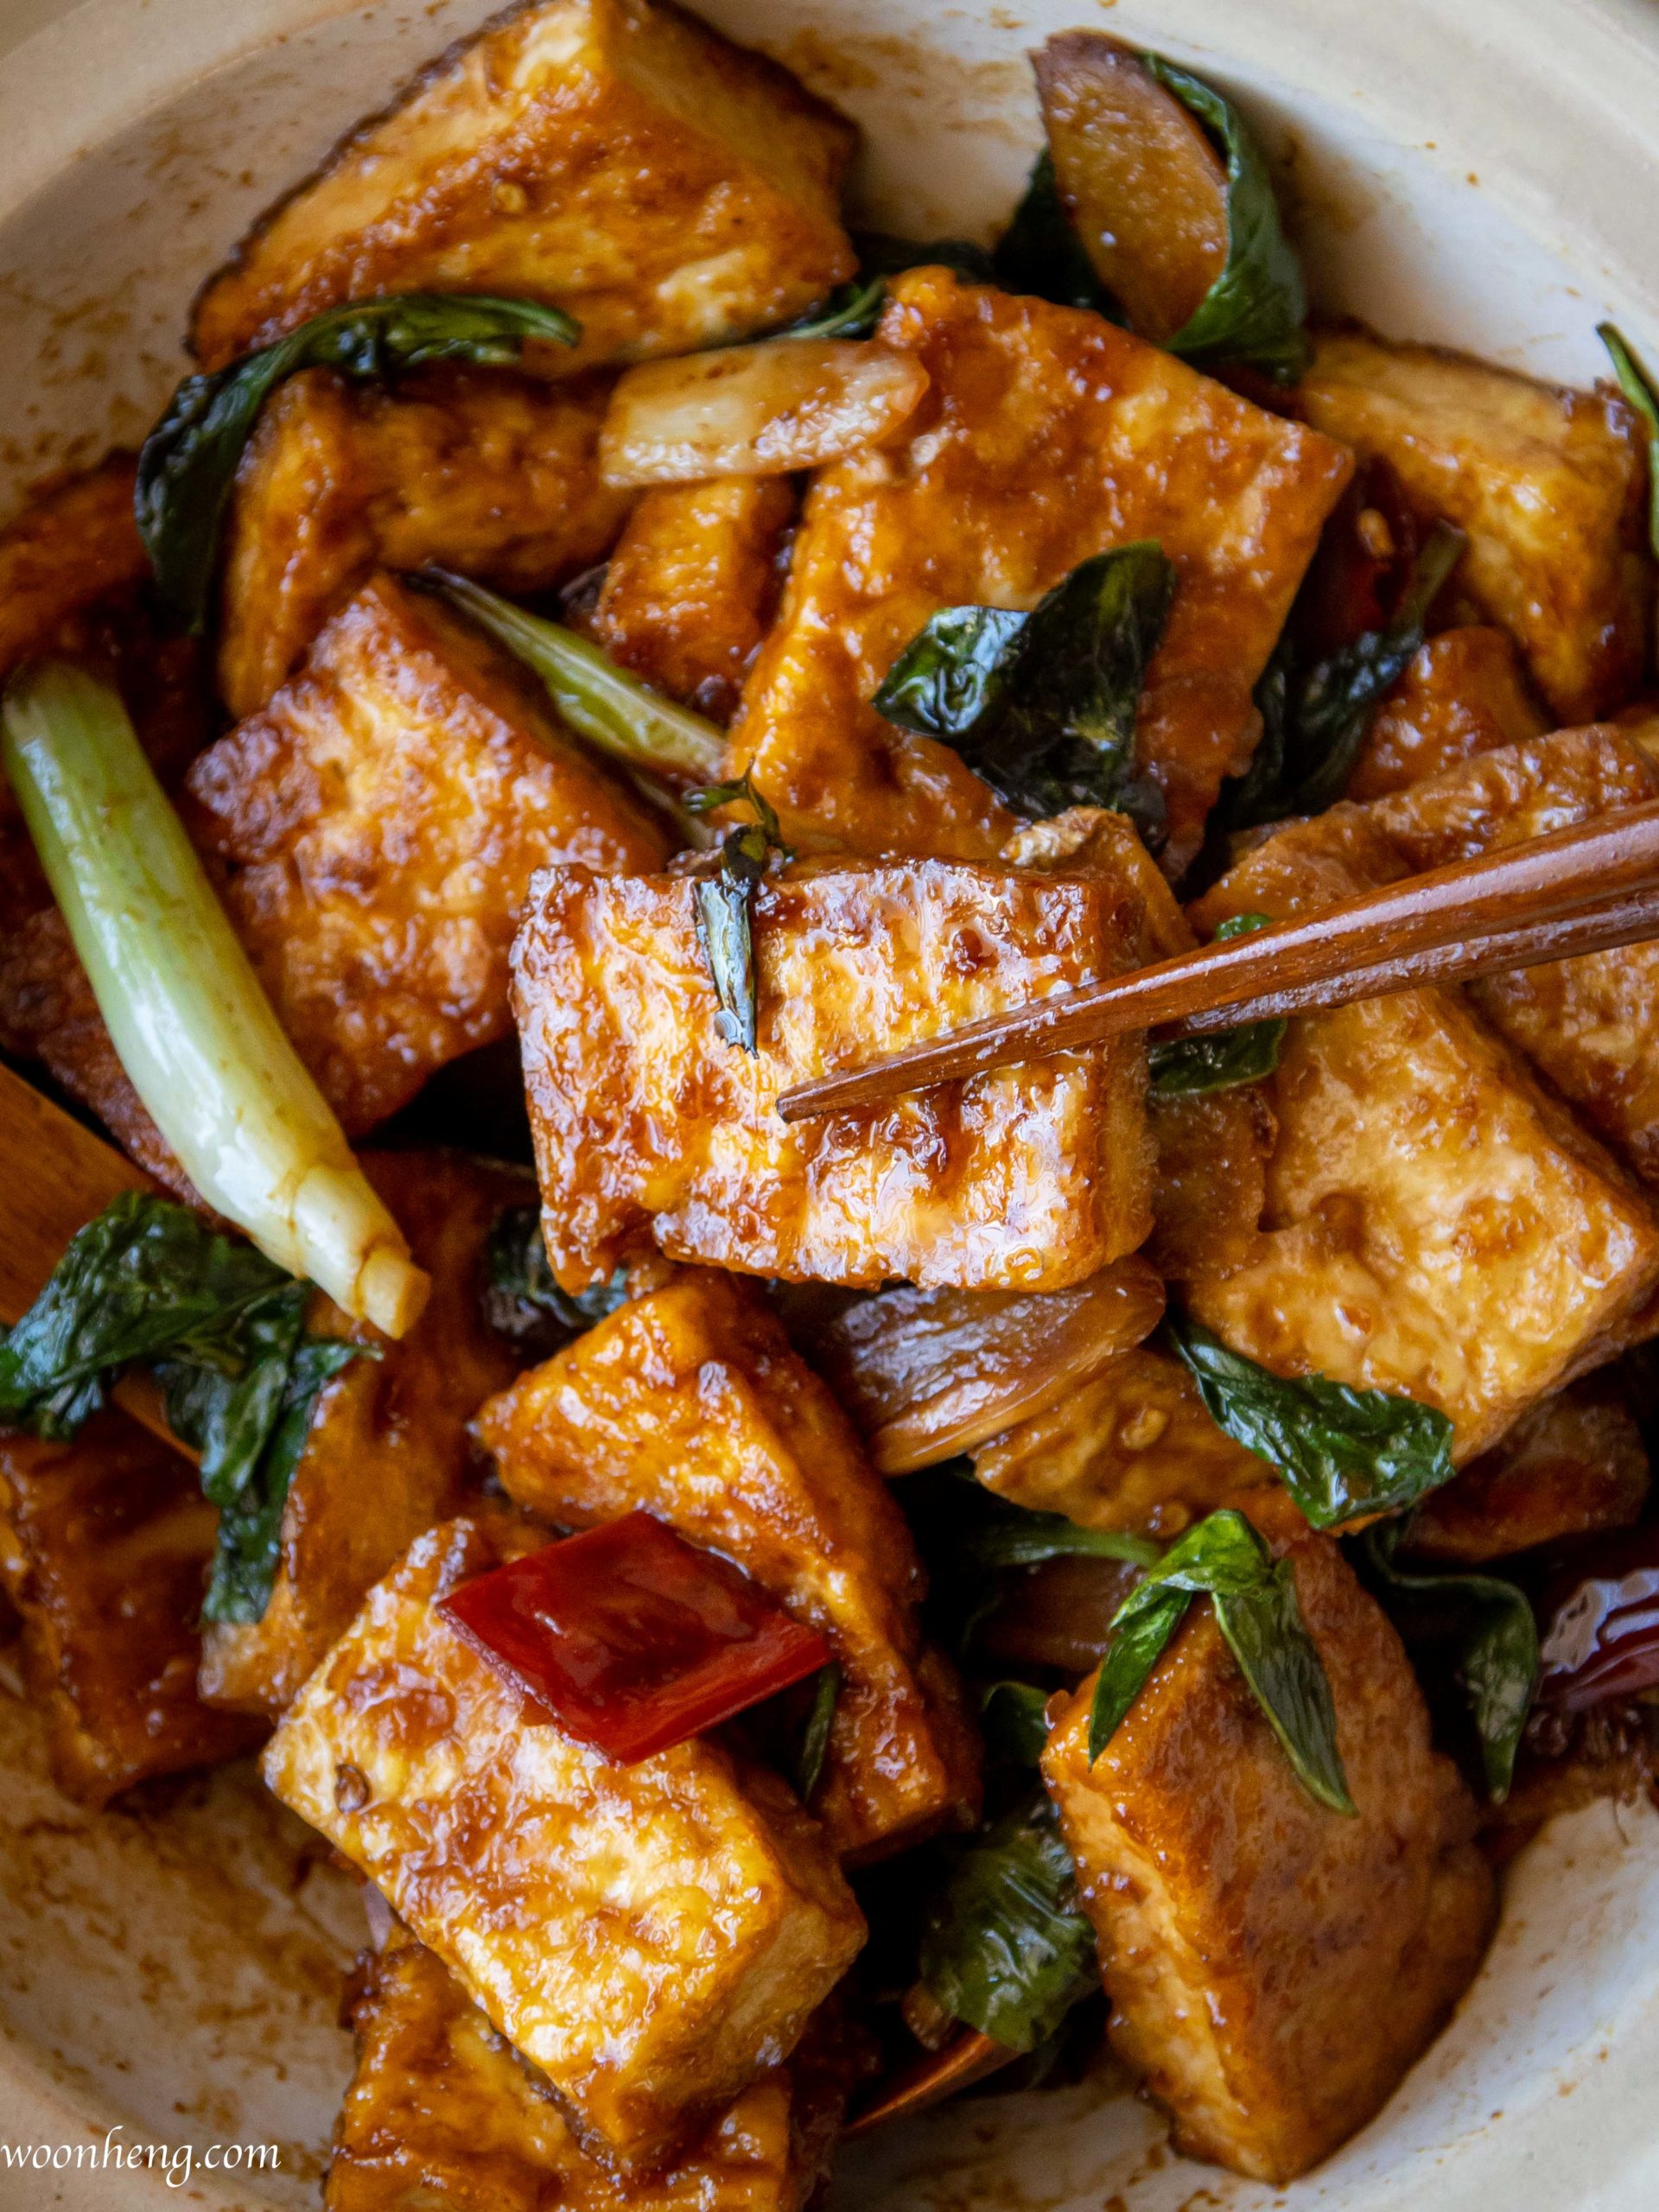 Easy Malaysian-styled Vegetable Curry that You Need - WoonHeng